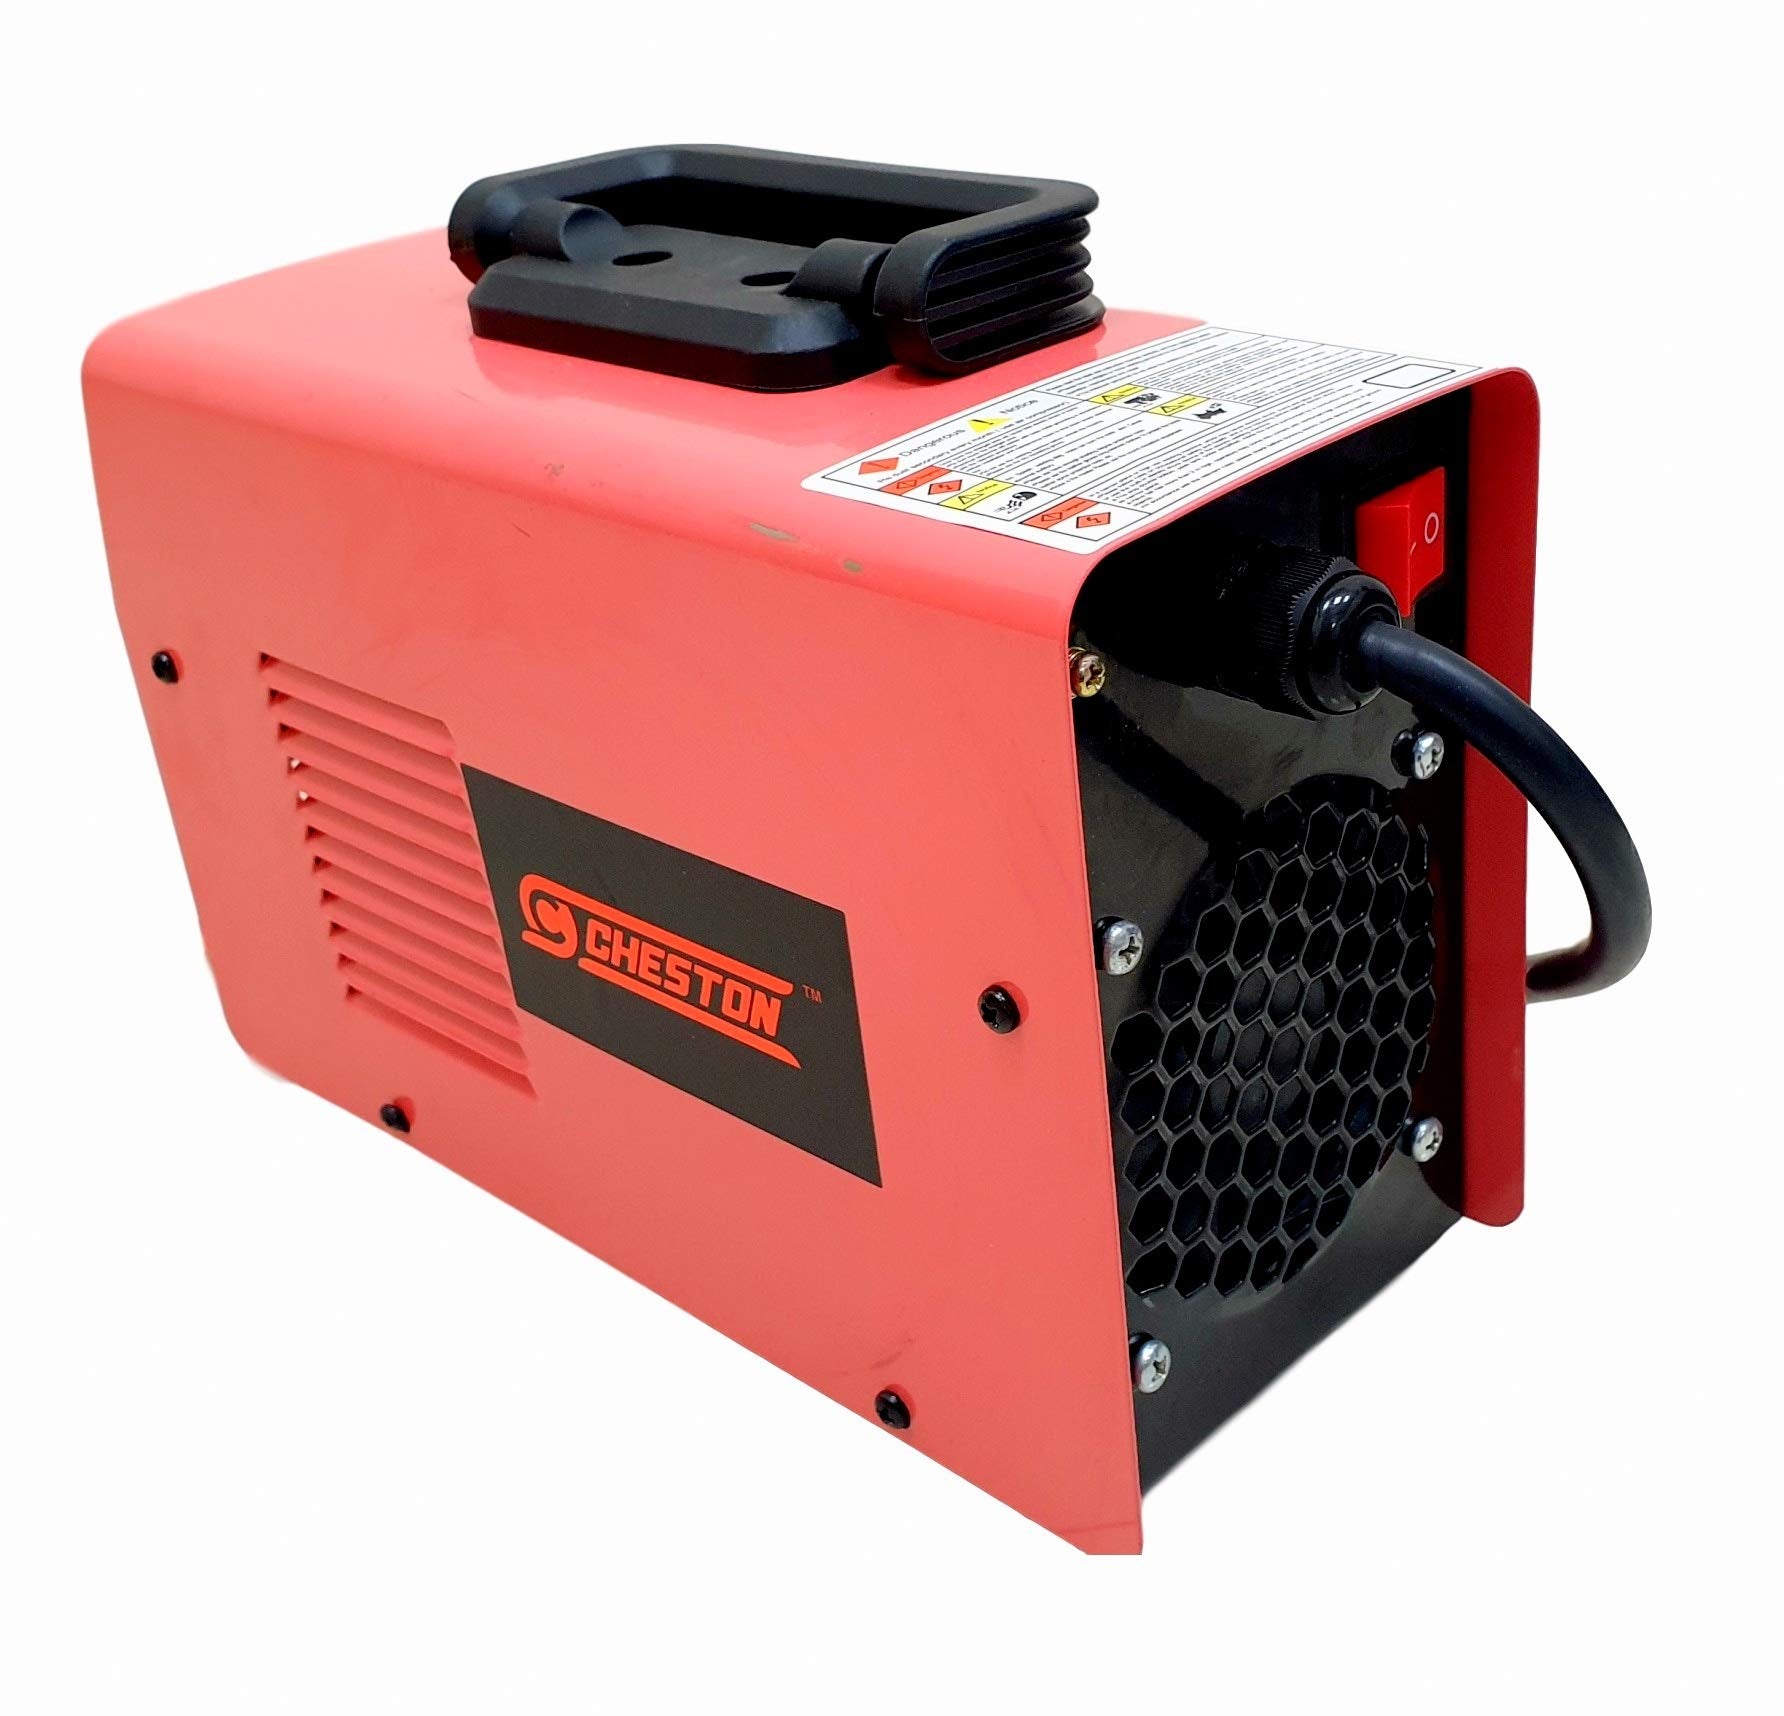 Cheston Inverter ARC Welding Machine (IGBT) 200A with Hot Start, Anti-Stick Functions, Arc Force Control with All Accessories